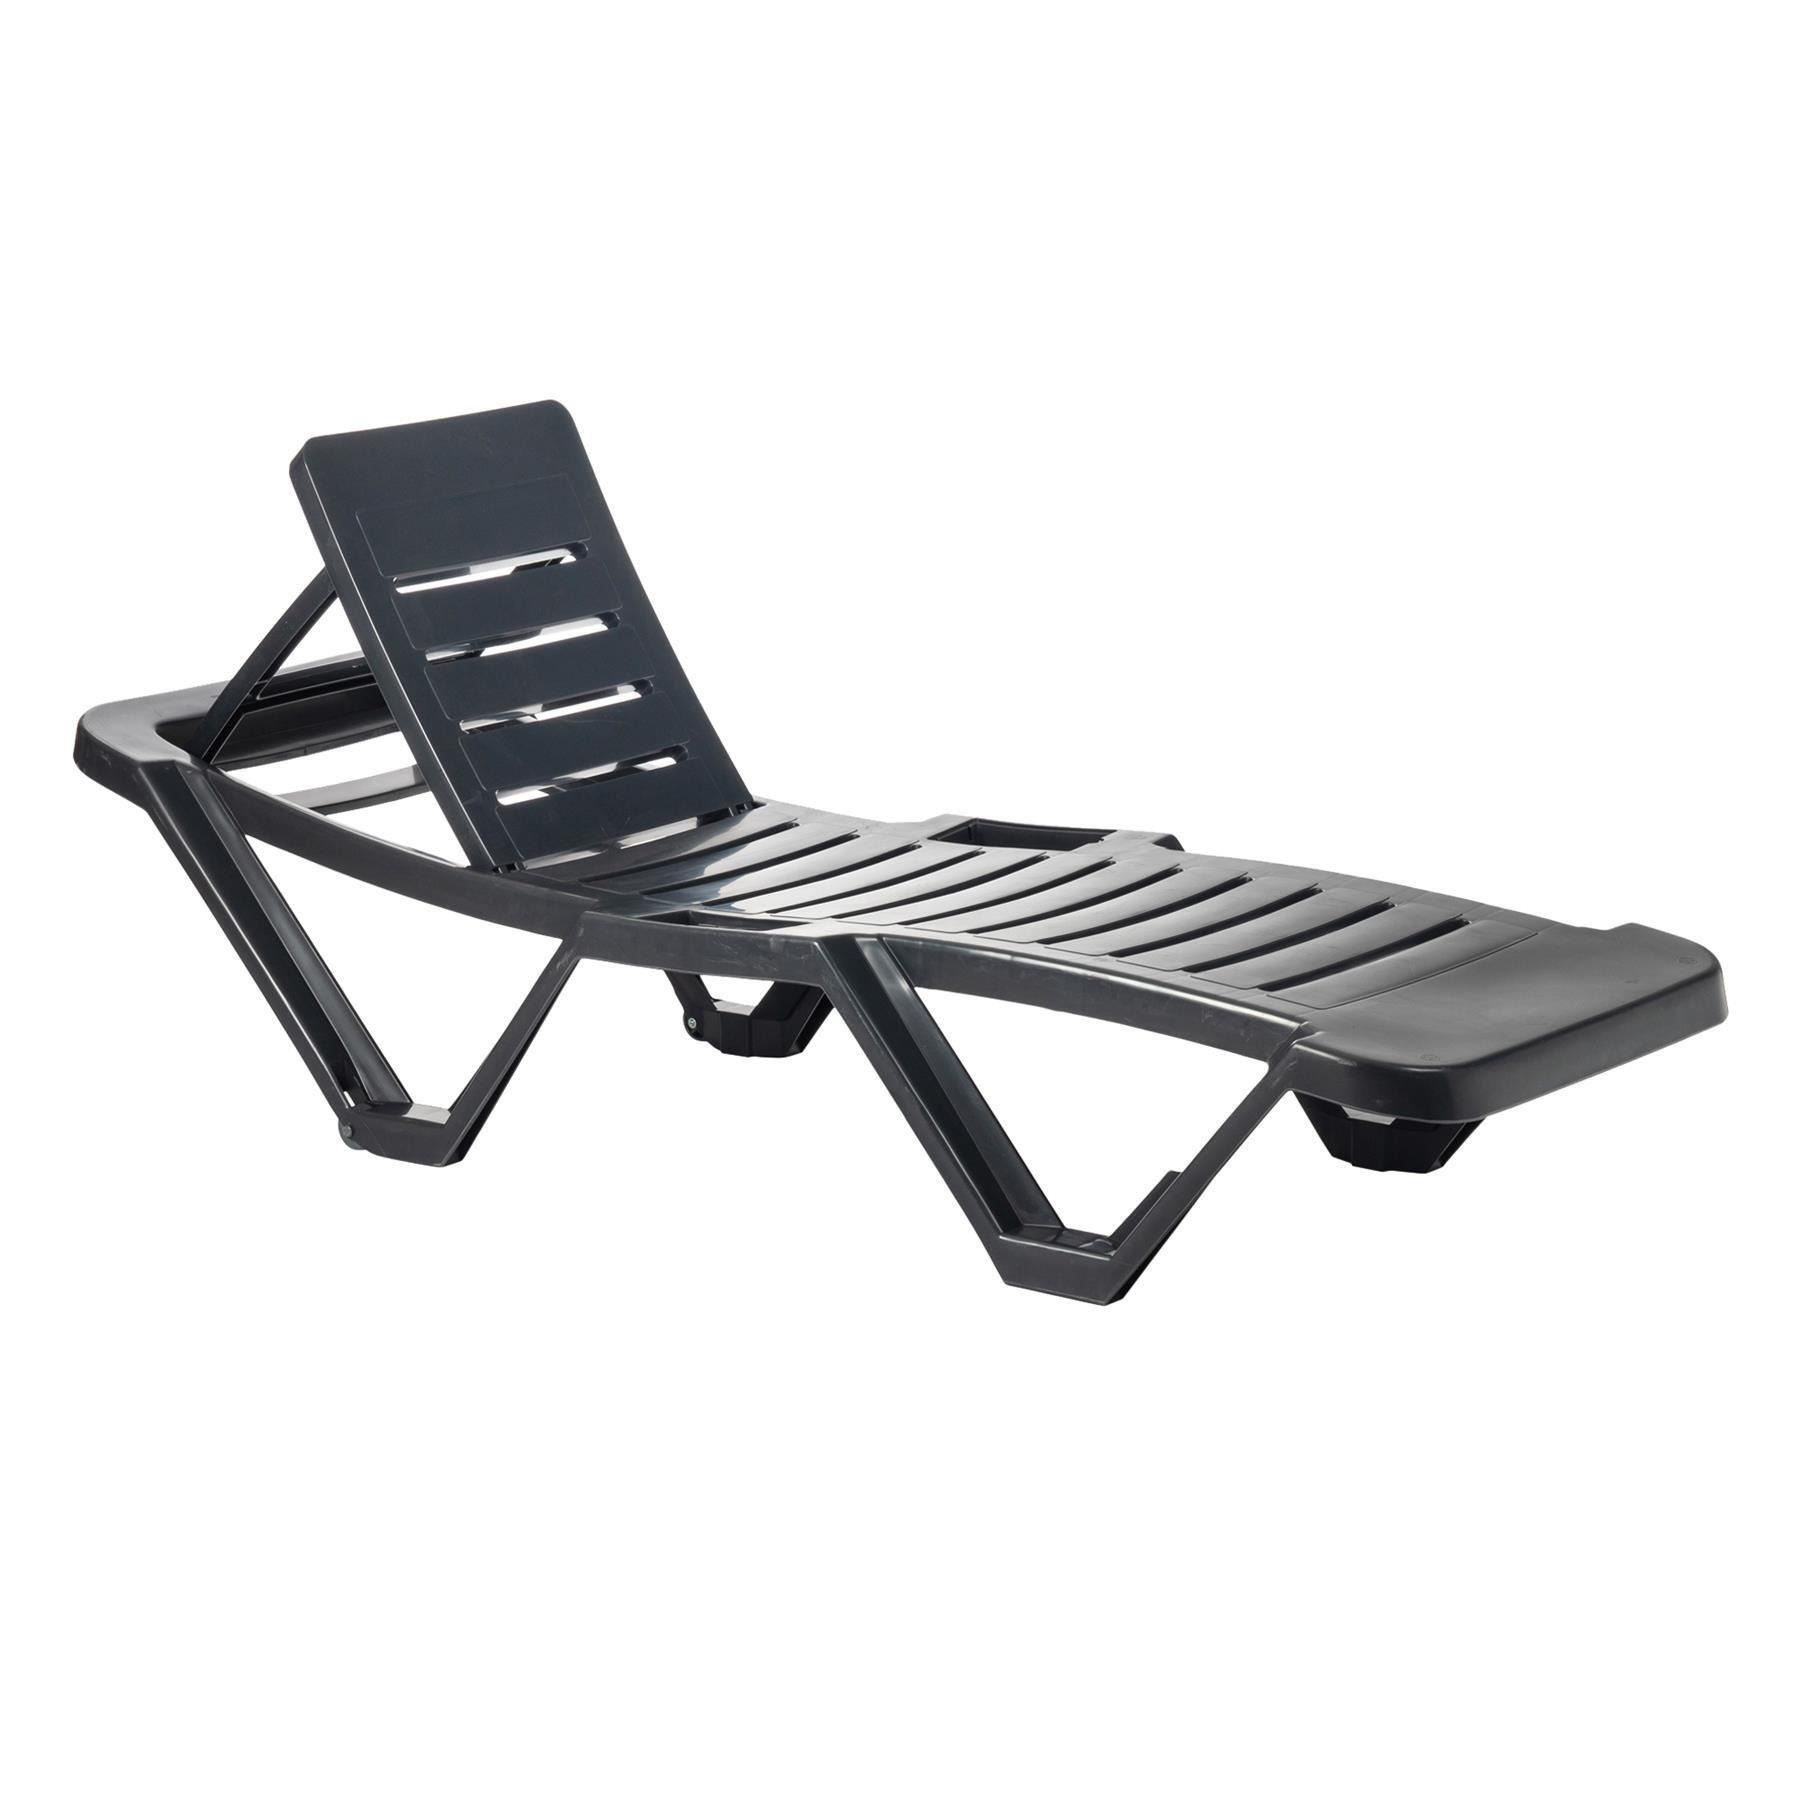 Master 5 Position Sun Lounger - image 1